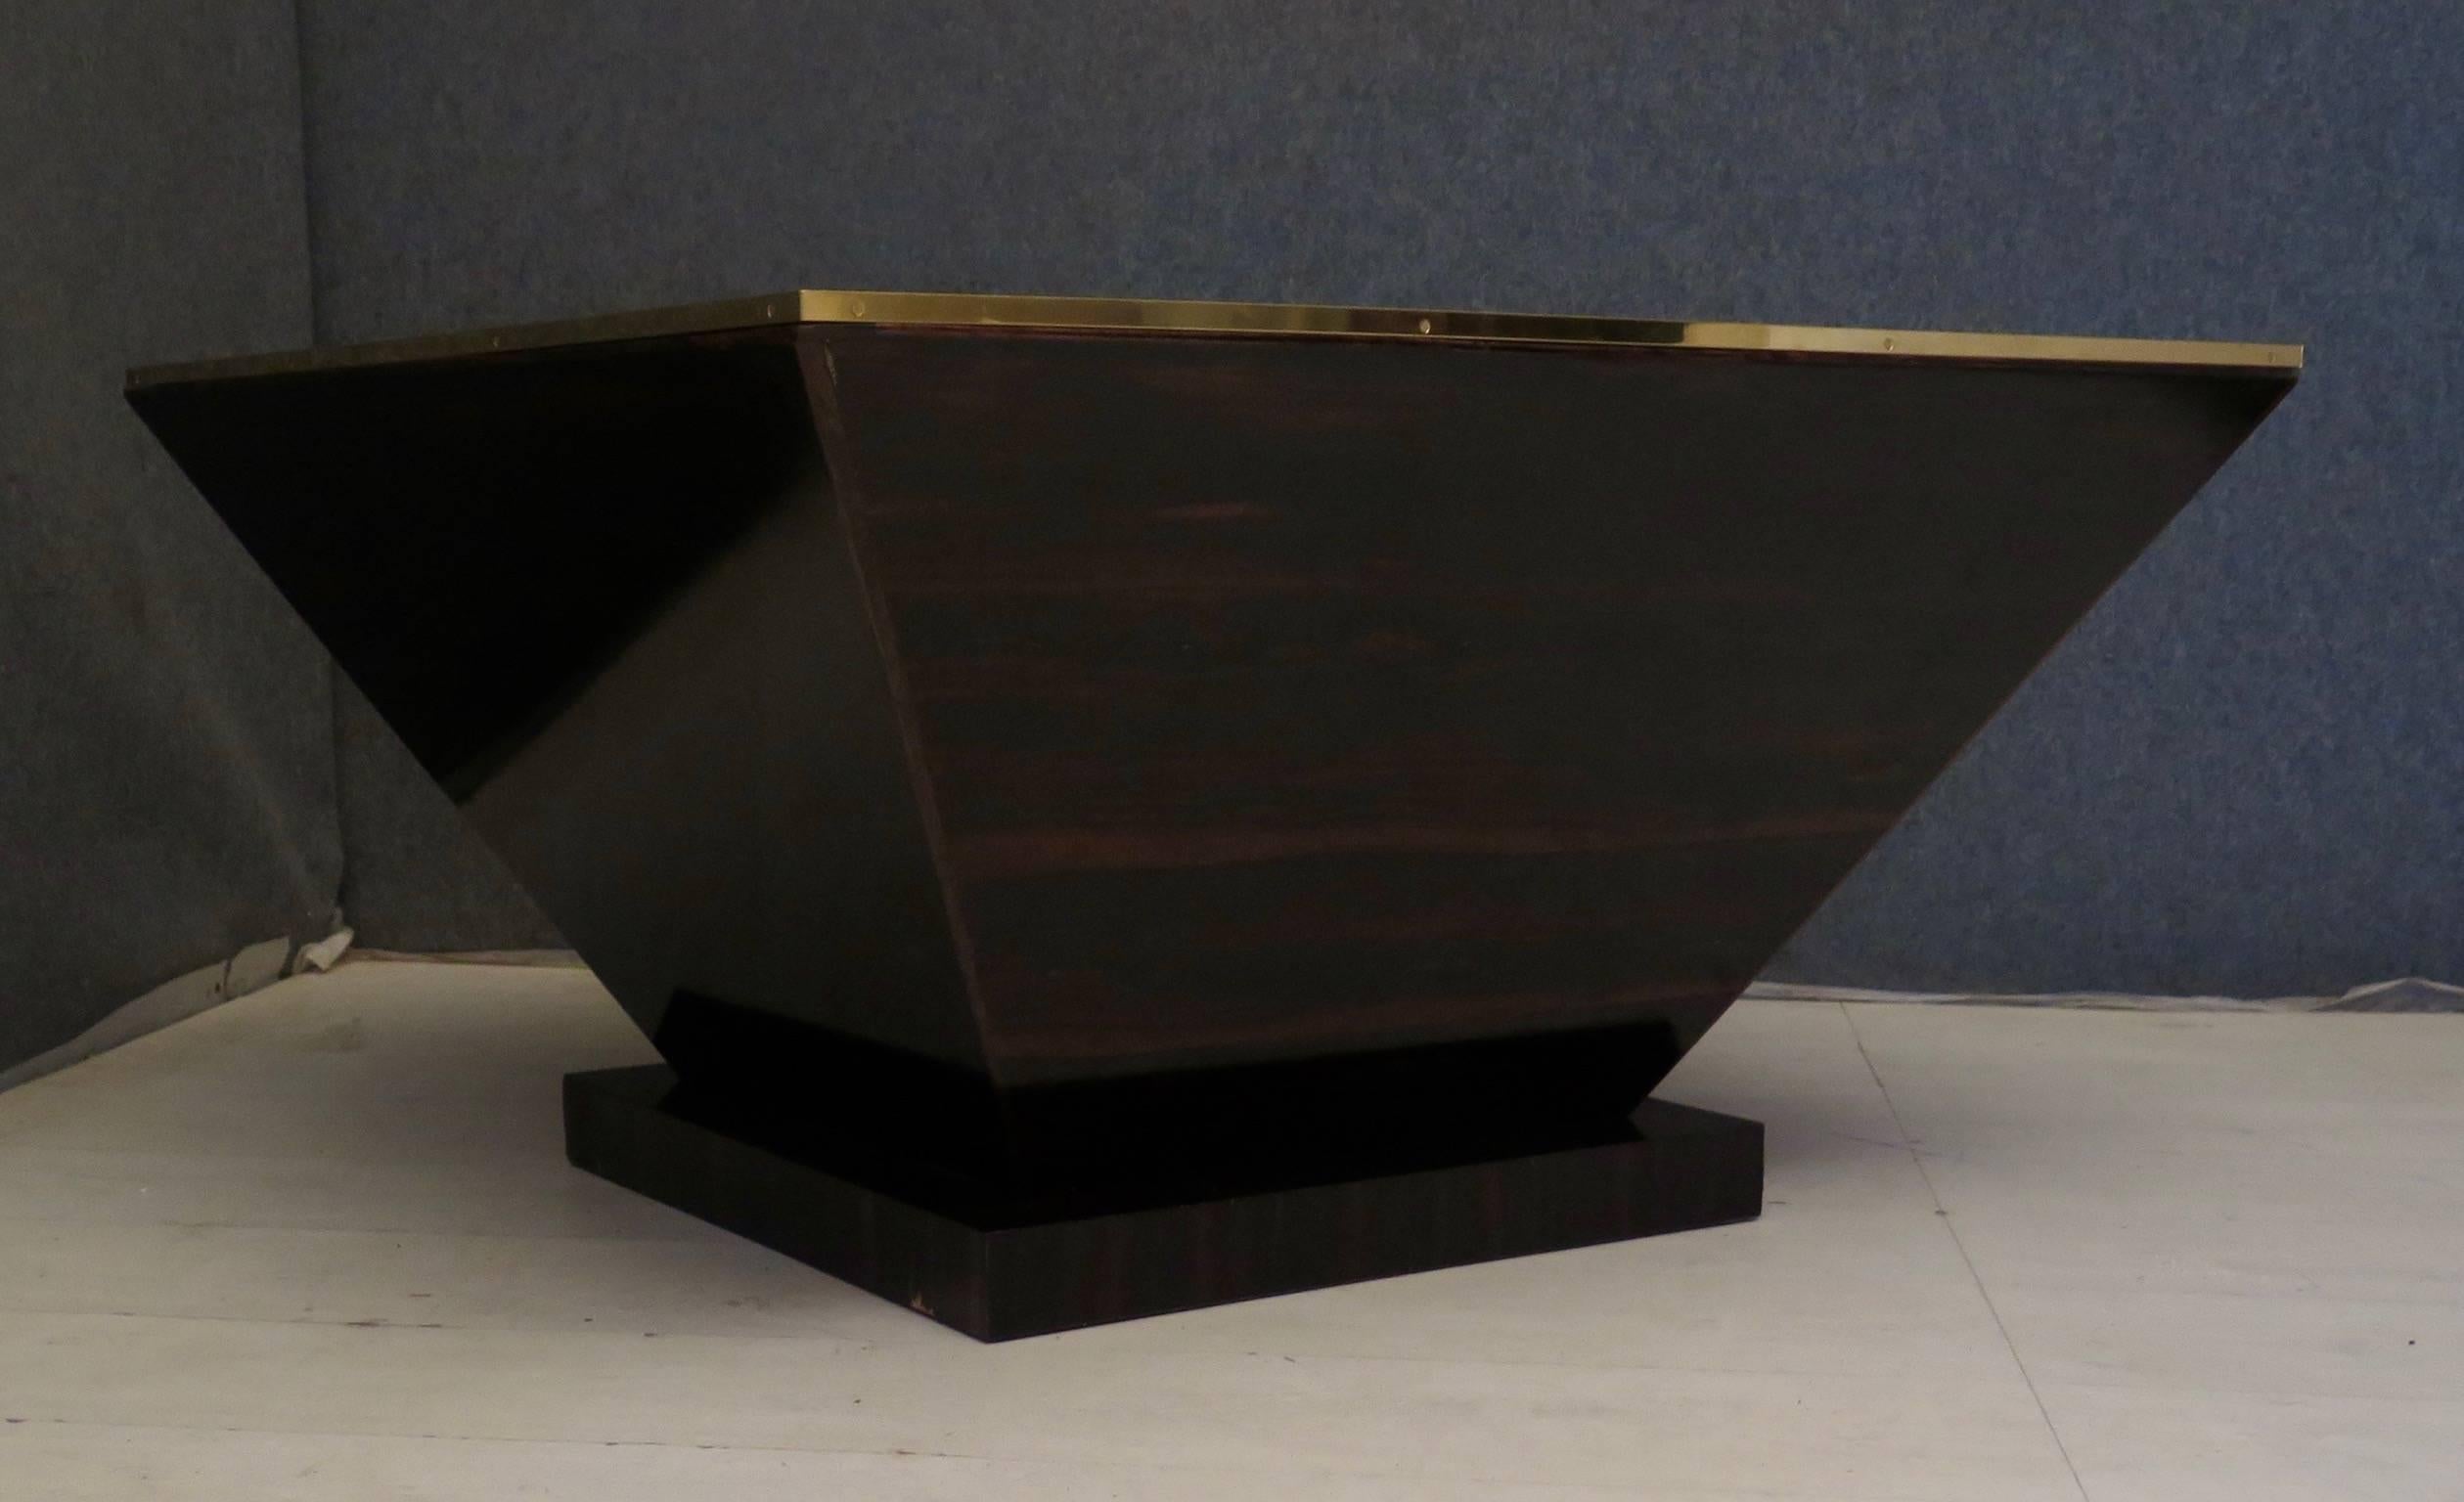 These perfectly smooth walls, and the sharp angles, of the inverted pyramid of its design, make the sofa table like a real sculpture, accentuated by the fine brass edge.

Square-shaped, the wooden structure of the table is completely covered with